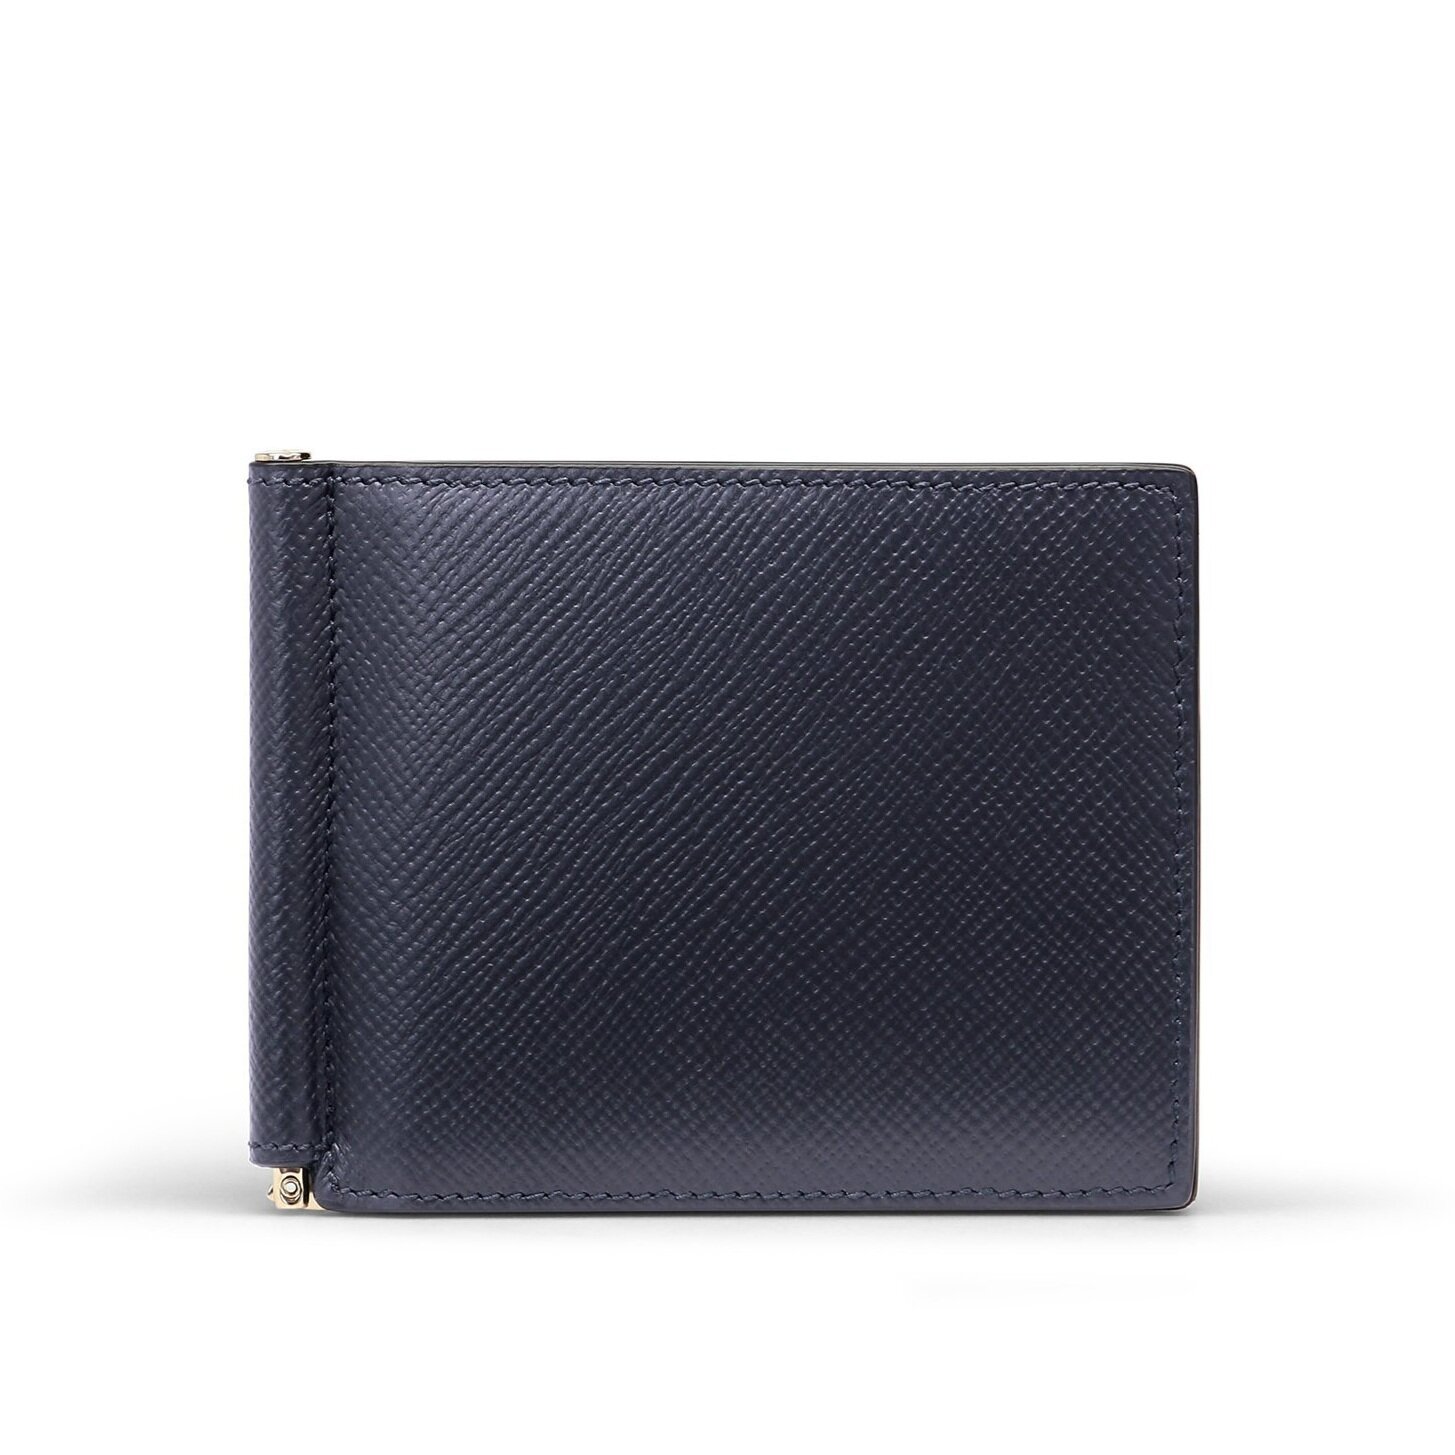 Smythson Panama Wallet, £225 (with personalisation from £6.95 per letter)